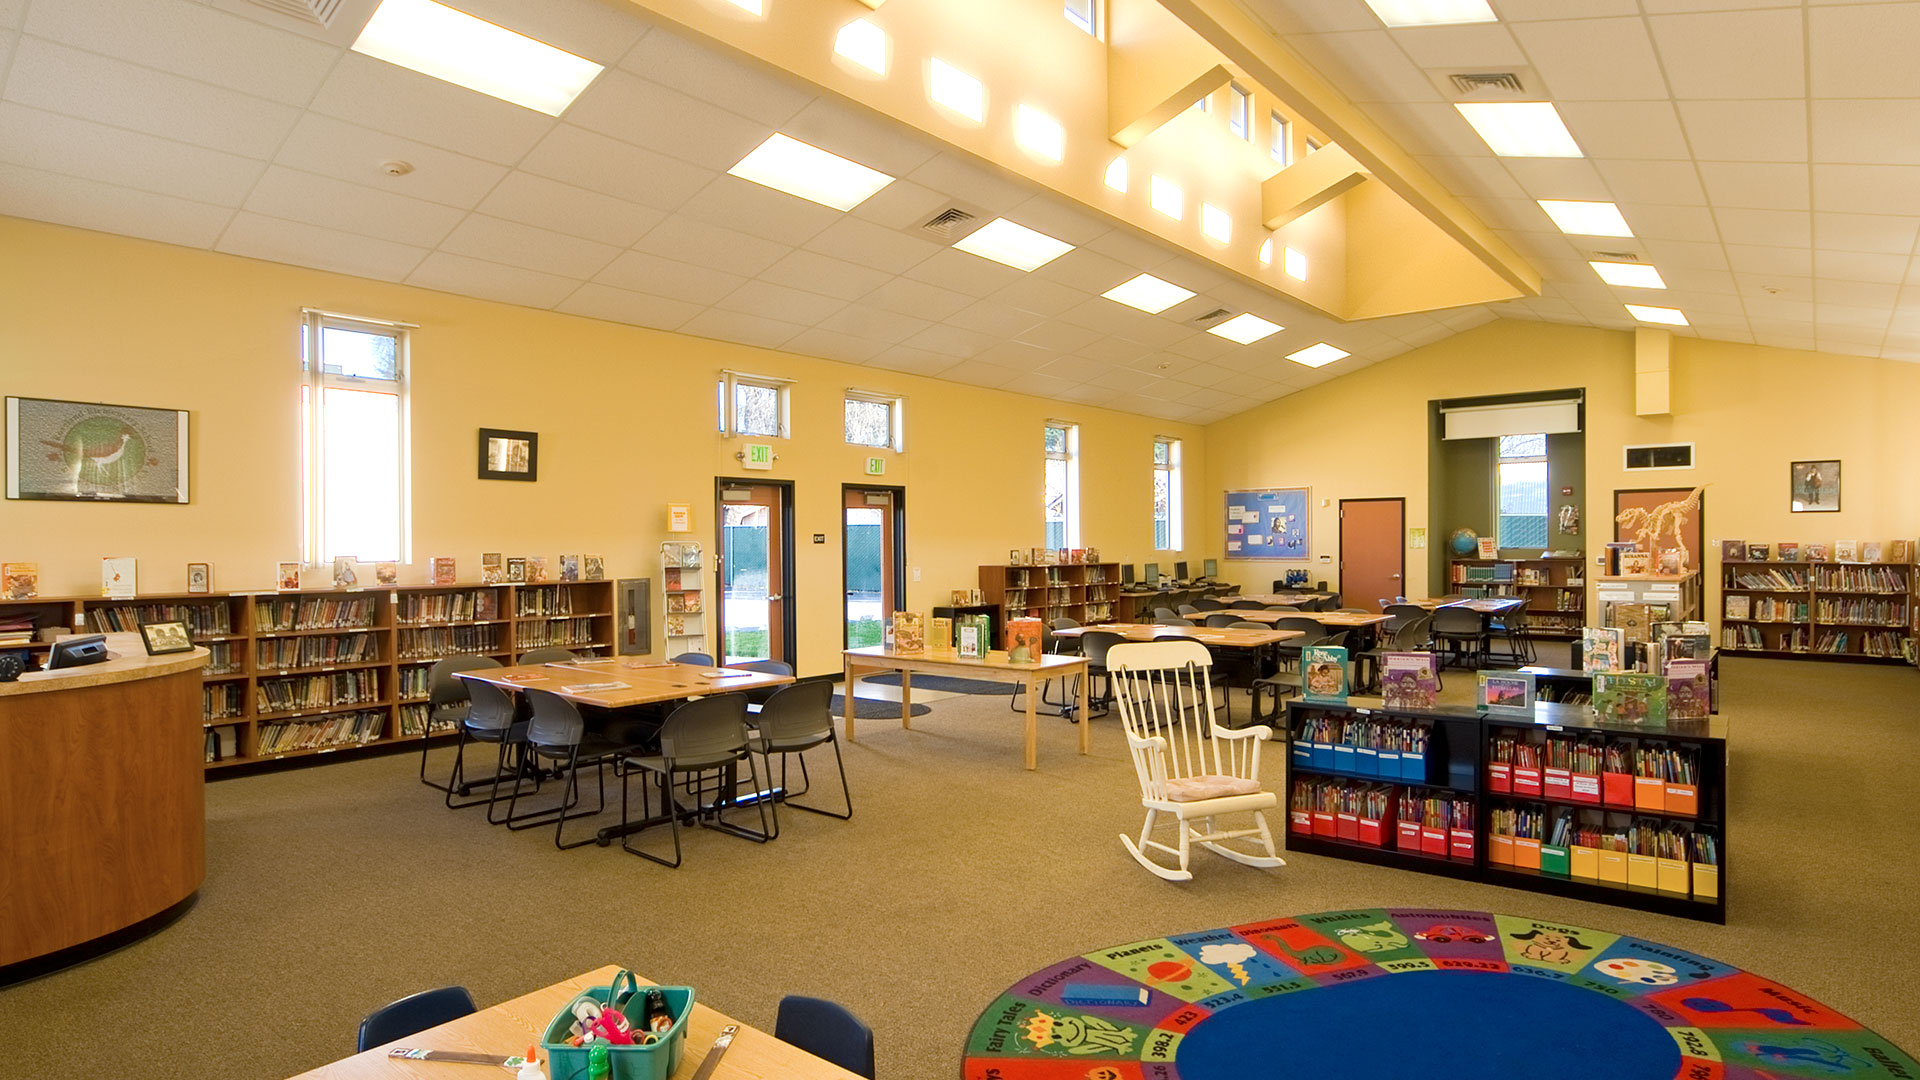 Library interior, yellow walls and bright, natural light from monitor above.